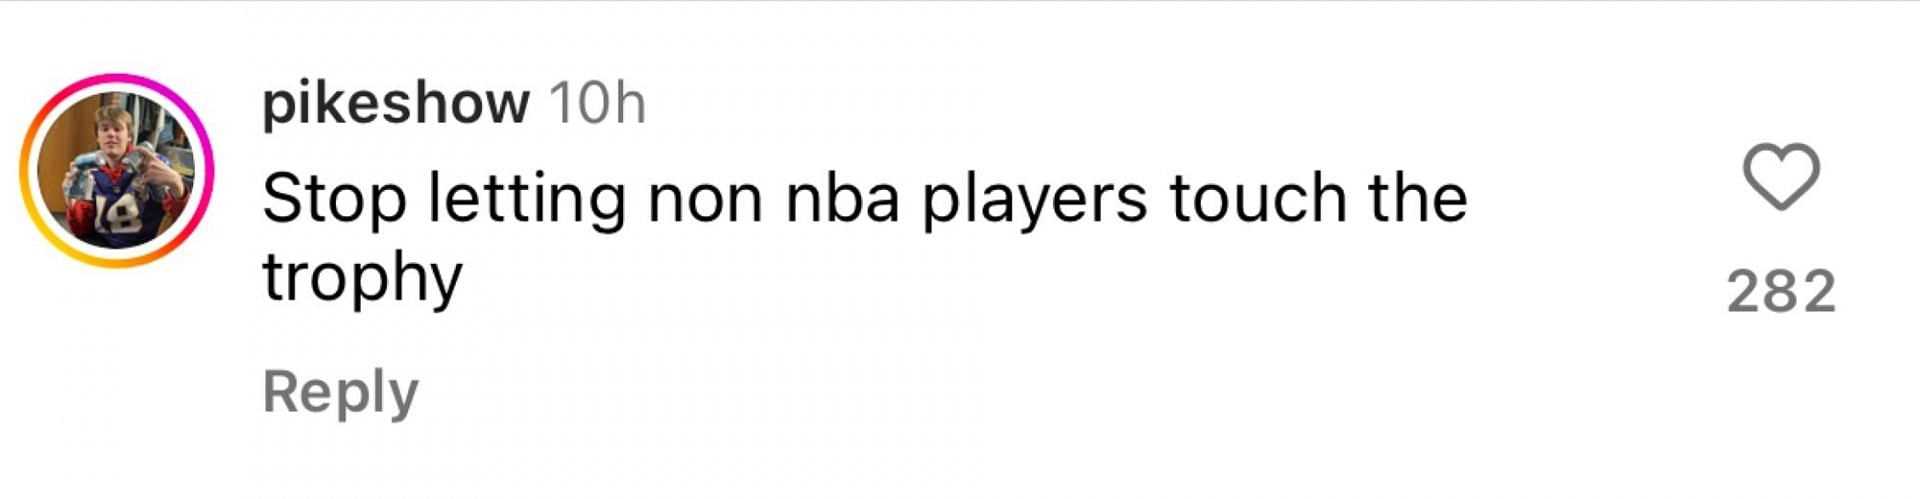 Fans comment on Michael Phelps picking up the NBA trophy; source - NBA Instagram